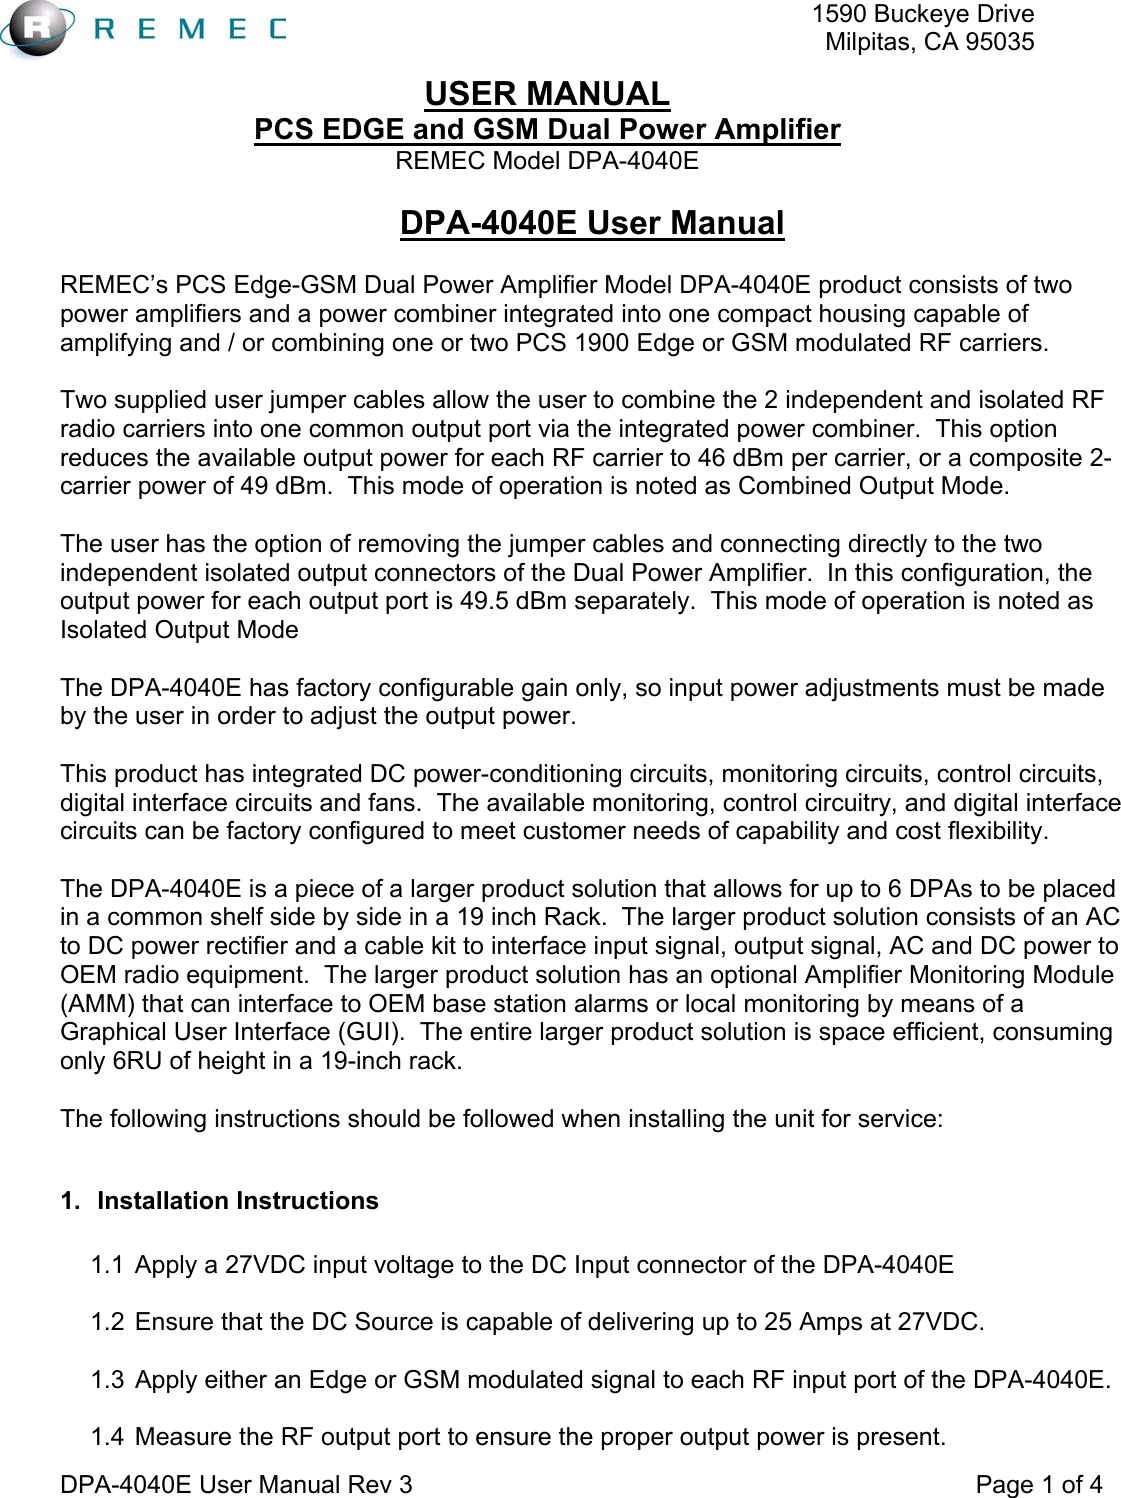   1590 Buckeye DriveMilpitas, CA 95035USER MANUAL PCS EDGE and GSM Dual Power Amplifier REMEC Model DPA-4040E  DPA-4040E User Manual Rev 3                                                                                 Page 1 of 4 DPA-4040E User Manual  REMEC’s PCS Edge-GSM Dual Power Amplifier Model DPA-4040E product consists of two power amplifiers and a power combiner integrated into one compact housing capable of amplifying and / or combining one or two PCS 1900 Edge or GSM modulated RF carriers.  Two supplied user jumper cables allow the user to combine the 2 independent and isolated RF radio carriers into one common output port via the integrated power combiner.  This option reduces the available output power for each RF carrier to 46 dBm per carrier, or a composite 2- carrier power of 49 dBm.  This mode of operation is noted as Combined Output Mode.  The user has the option of removing the jumper cables and connecting directly to the two independent isolated output connectors of the Dual Power Amplifier.  In this configuration, the output power for each output port is 49.5 dBm separately.  This mode of operation is noted as Isolated Output Mode  The DPA-4040E has factory configurable gain only, so input power adjustments must be made by the user in order to adjust the output power.  This product has integrated DC power-conditioning circuits, monitoring circuits, control circuits, digital interface circuits and fans.  The available monitoring, control circuitry, and digital interface circuits can be factory configured to meet customer needs of capability and cost flexibility.  The DPA-4040E is a piece of a larger product solution that allows for up to 6 DPAs to be placed in a common shelf side by side in a 19 inch Rack.  The larger product solution consists of an AC to DC power rectifier and a cable kit to interface input signal, output signal, AC and DC power to OEM radio equipment.  The larger product solution has an optional Amplifier Monitoring Module (AMM) that can interface to OEM base station alarms or local monitoring by means of a Graphical User Interface (GUI).  The entire larger product solution is space efficient, consuming only 6RU of height in a 19-inch rack.  The following instructions should be followed when installing the unit for service:  1. Installation Instructions  1.1  Apply a 27VDC input voltage to the DC Input connector of the DPA-4040E  1.2  Ensure that the DC Source is capable of delivering up to 25 Amps at 27VDC.  1.3  Apply either an Edge or GSM modulated signal to each RF input port of the DPA-4040E.  1.4  Measure the RF output port to ensure the proper output power is present. 